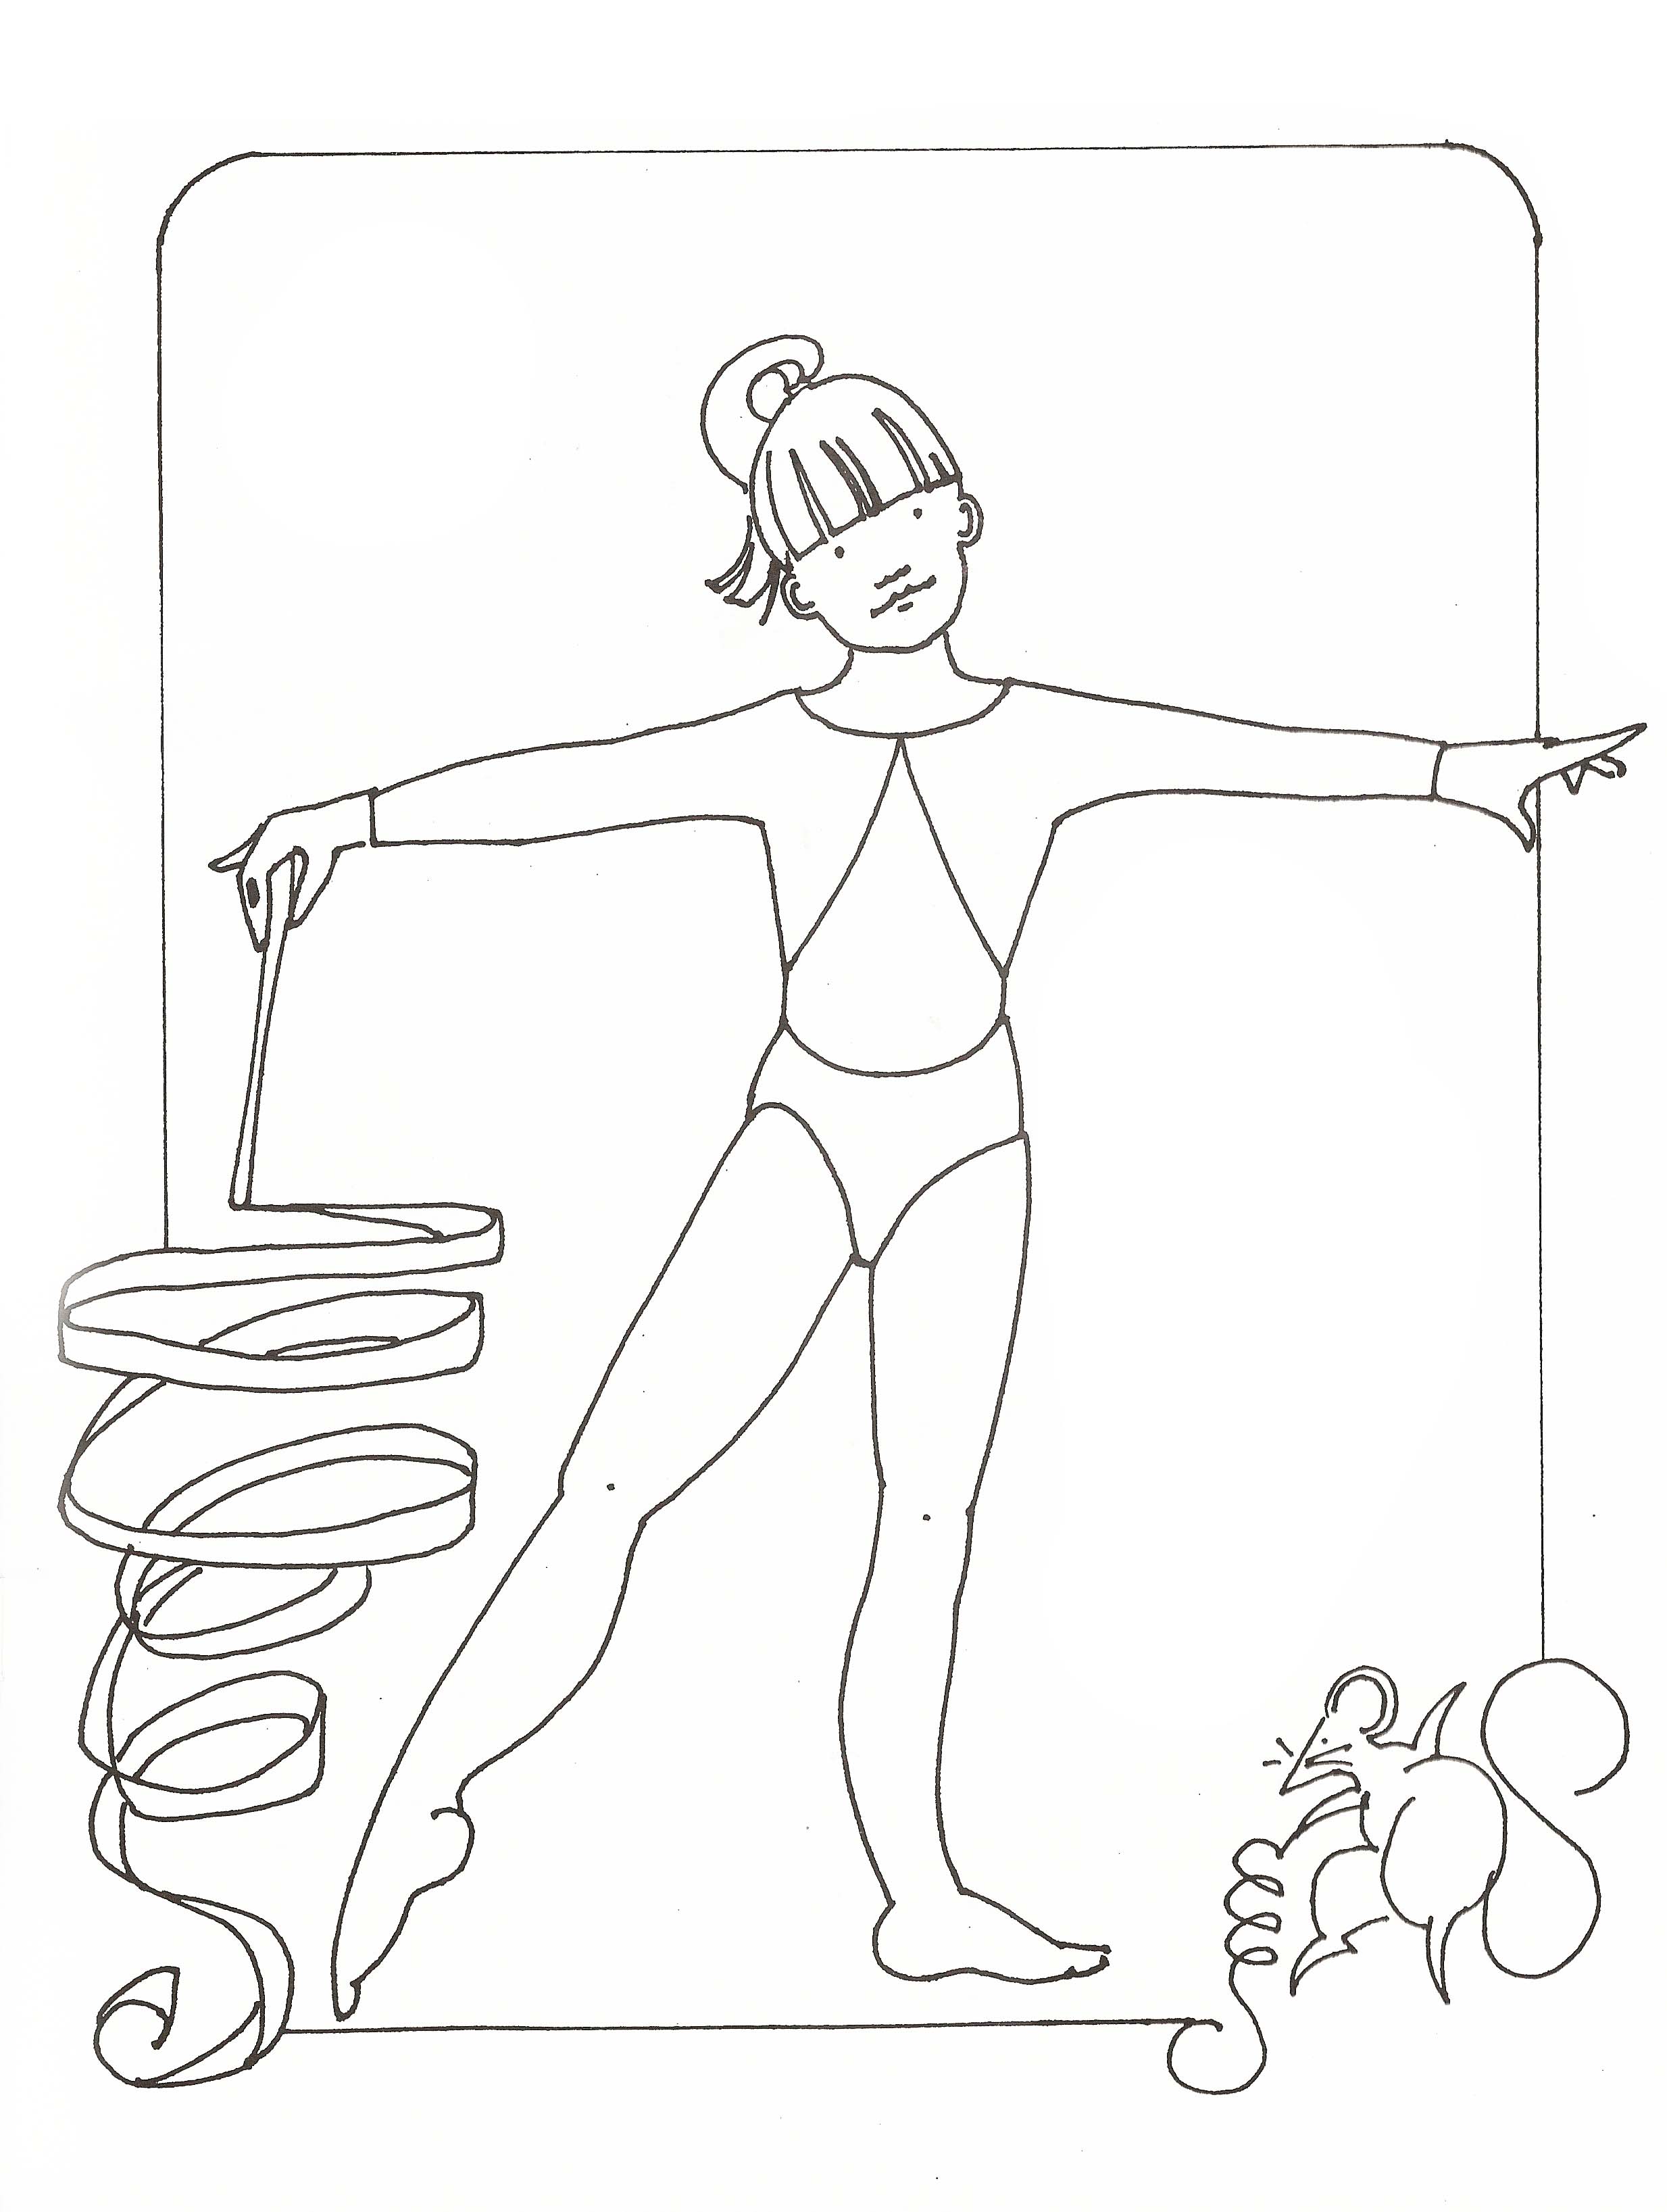 Barbie Gymnastic Coloring Pages For Girls - Coloring Pages For All ...